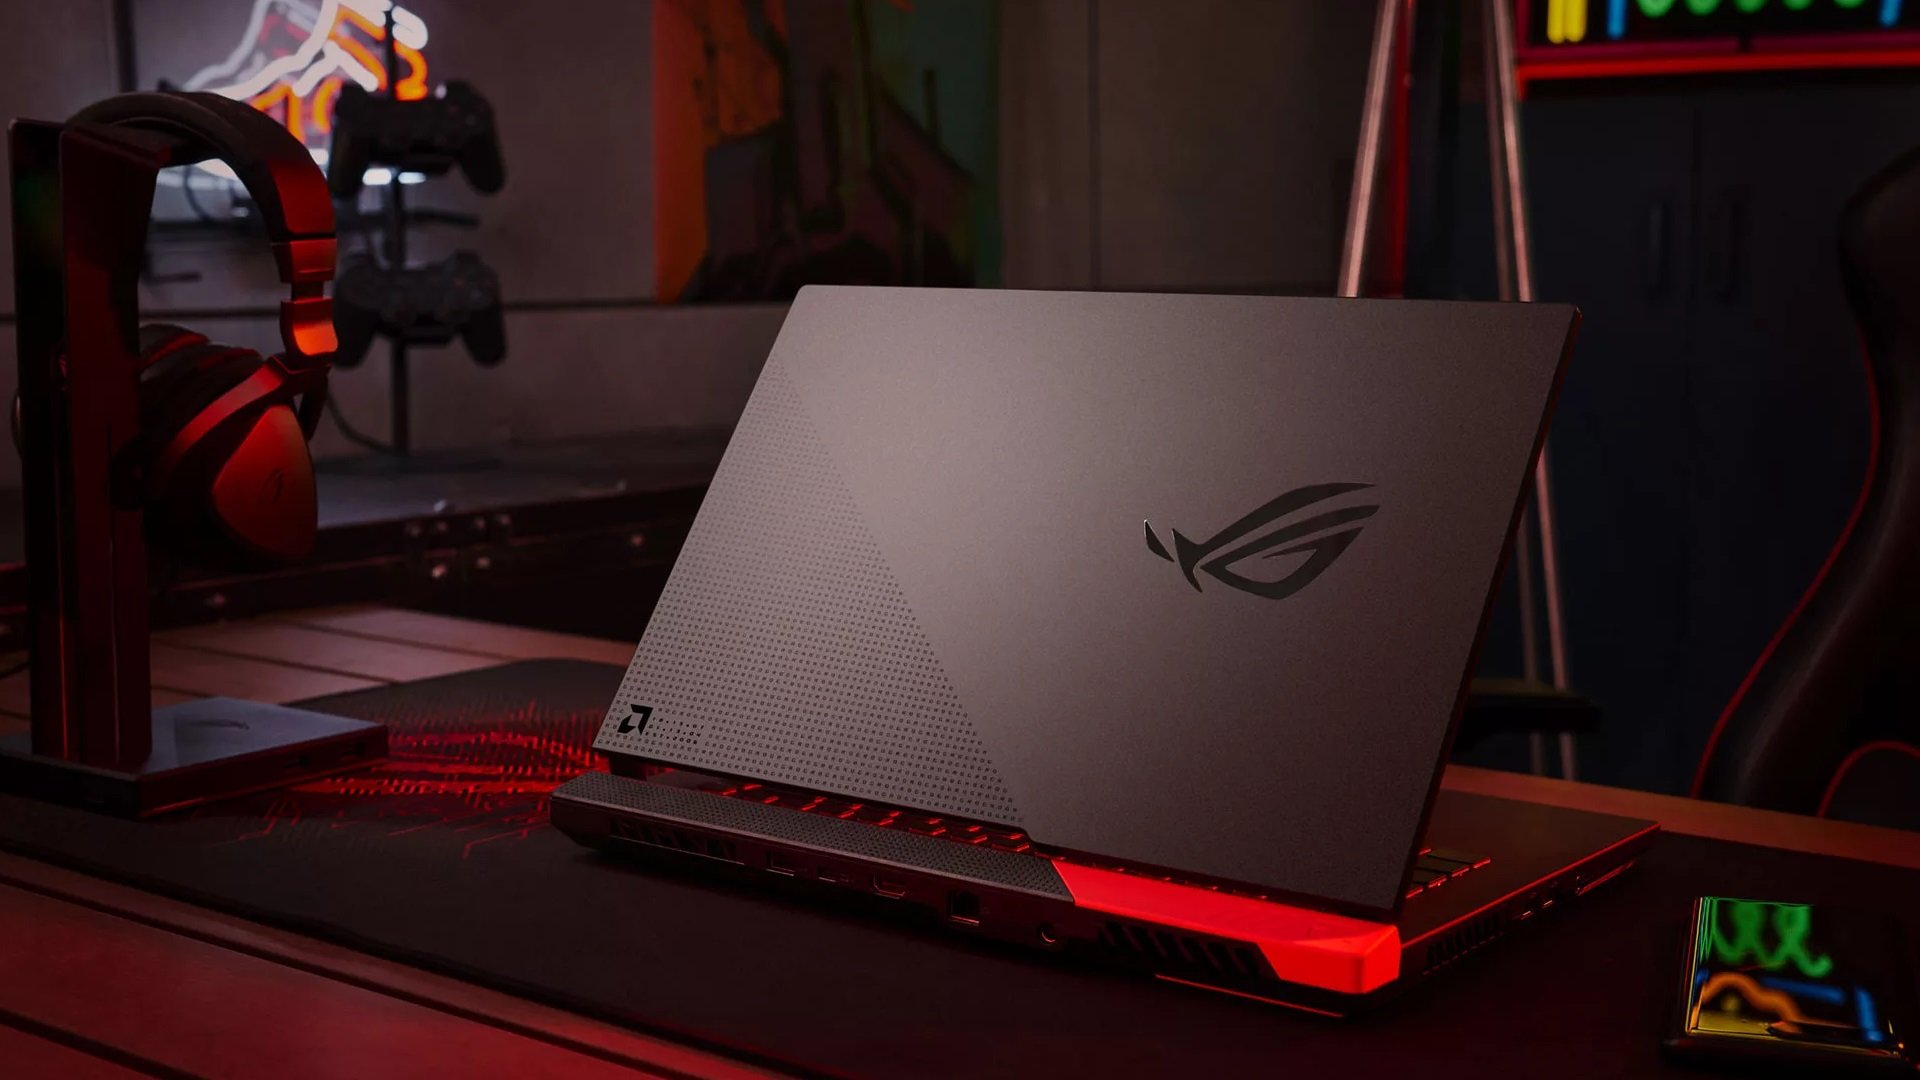 The Best Ways to Improve Gaming Performance on a Laptop - A Comprehensive Guide